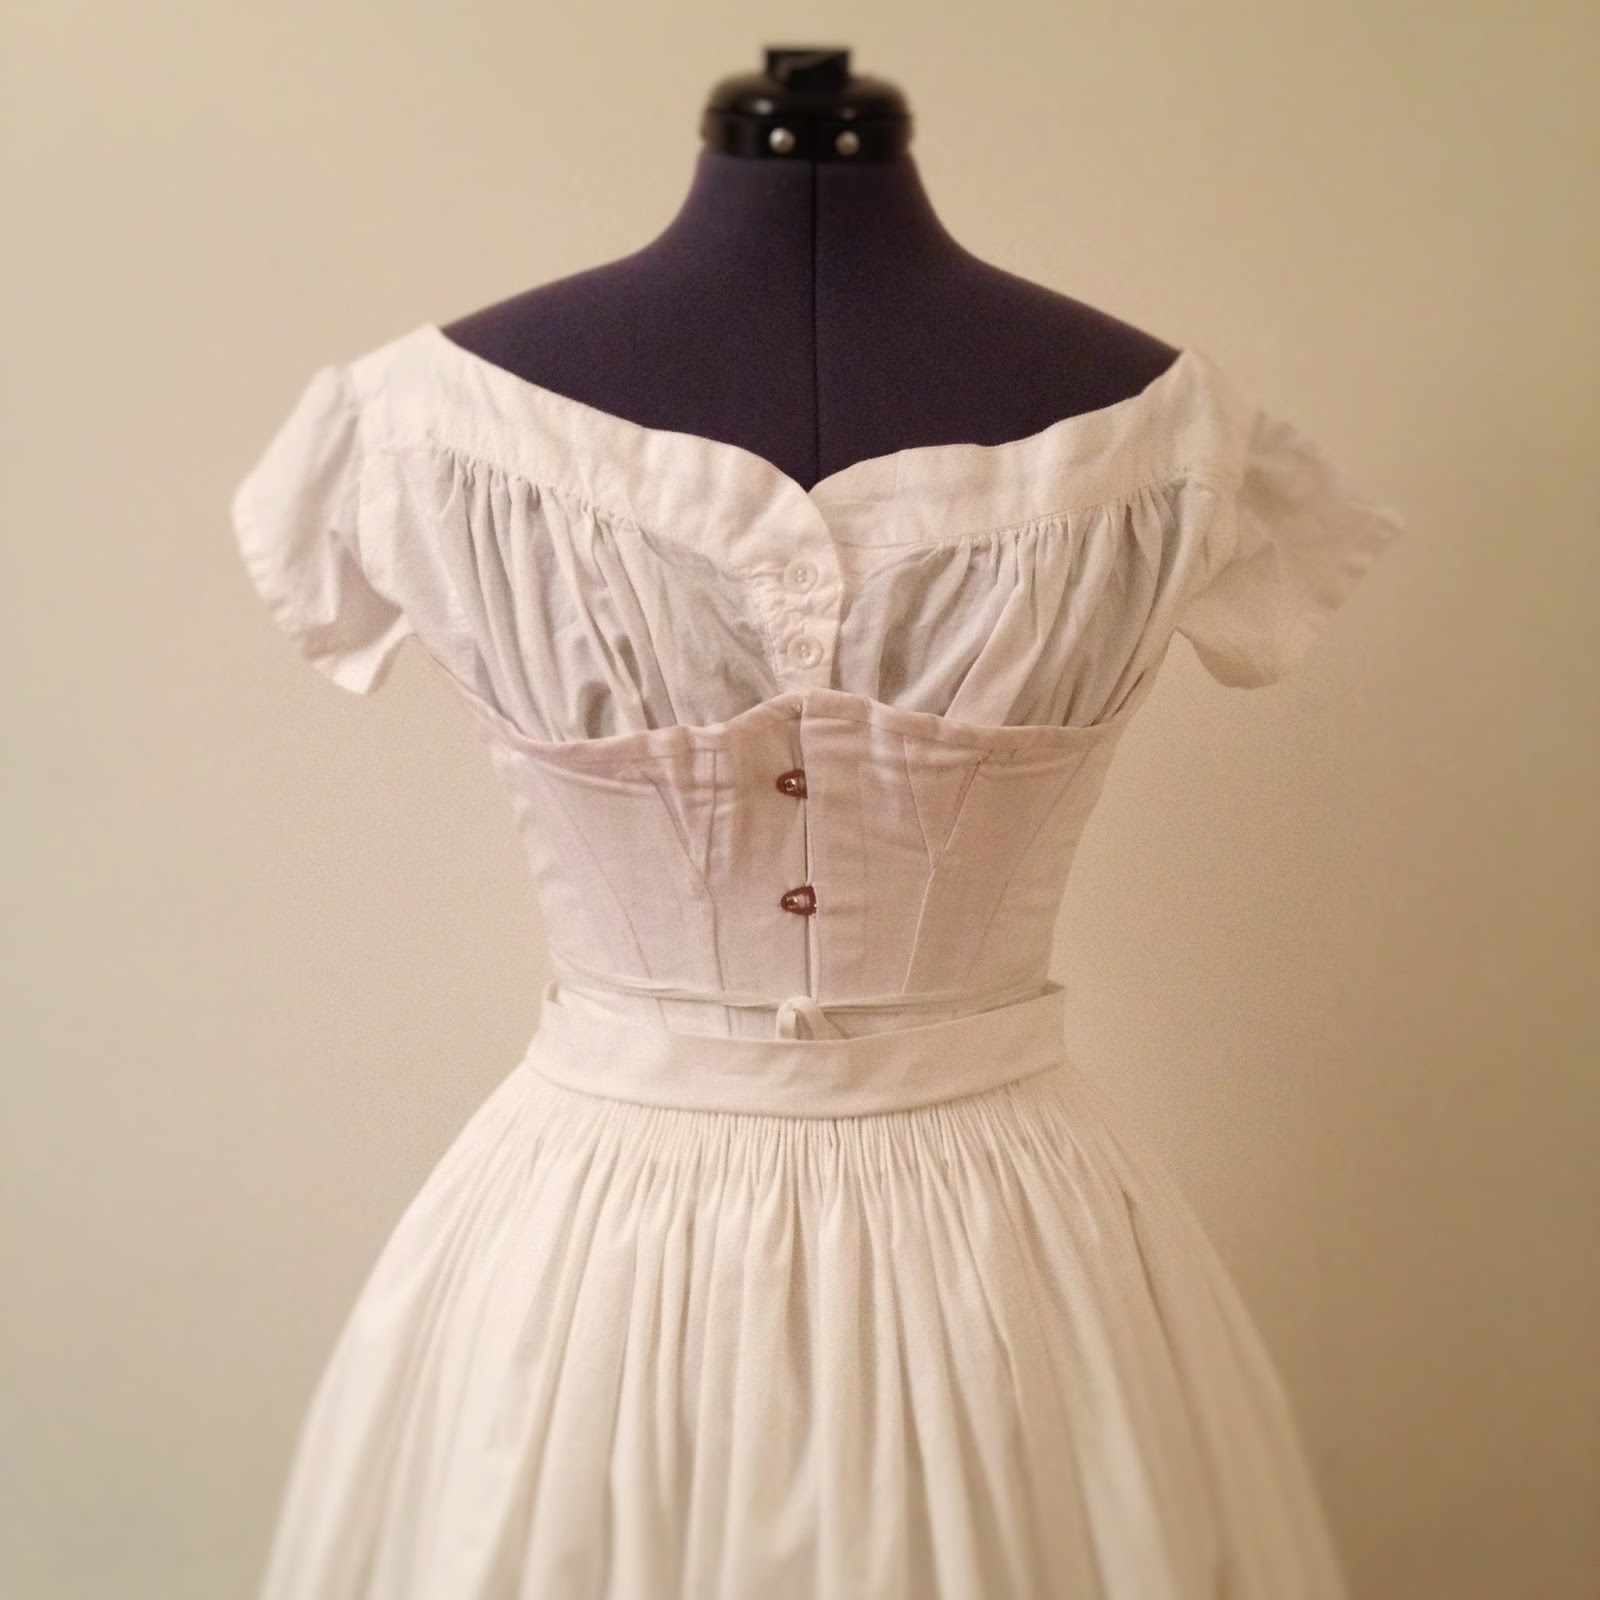 The Sewphisticate: HSM January Challenge: 1850s Undergarments